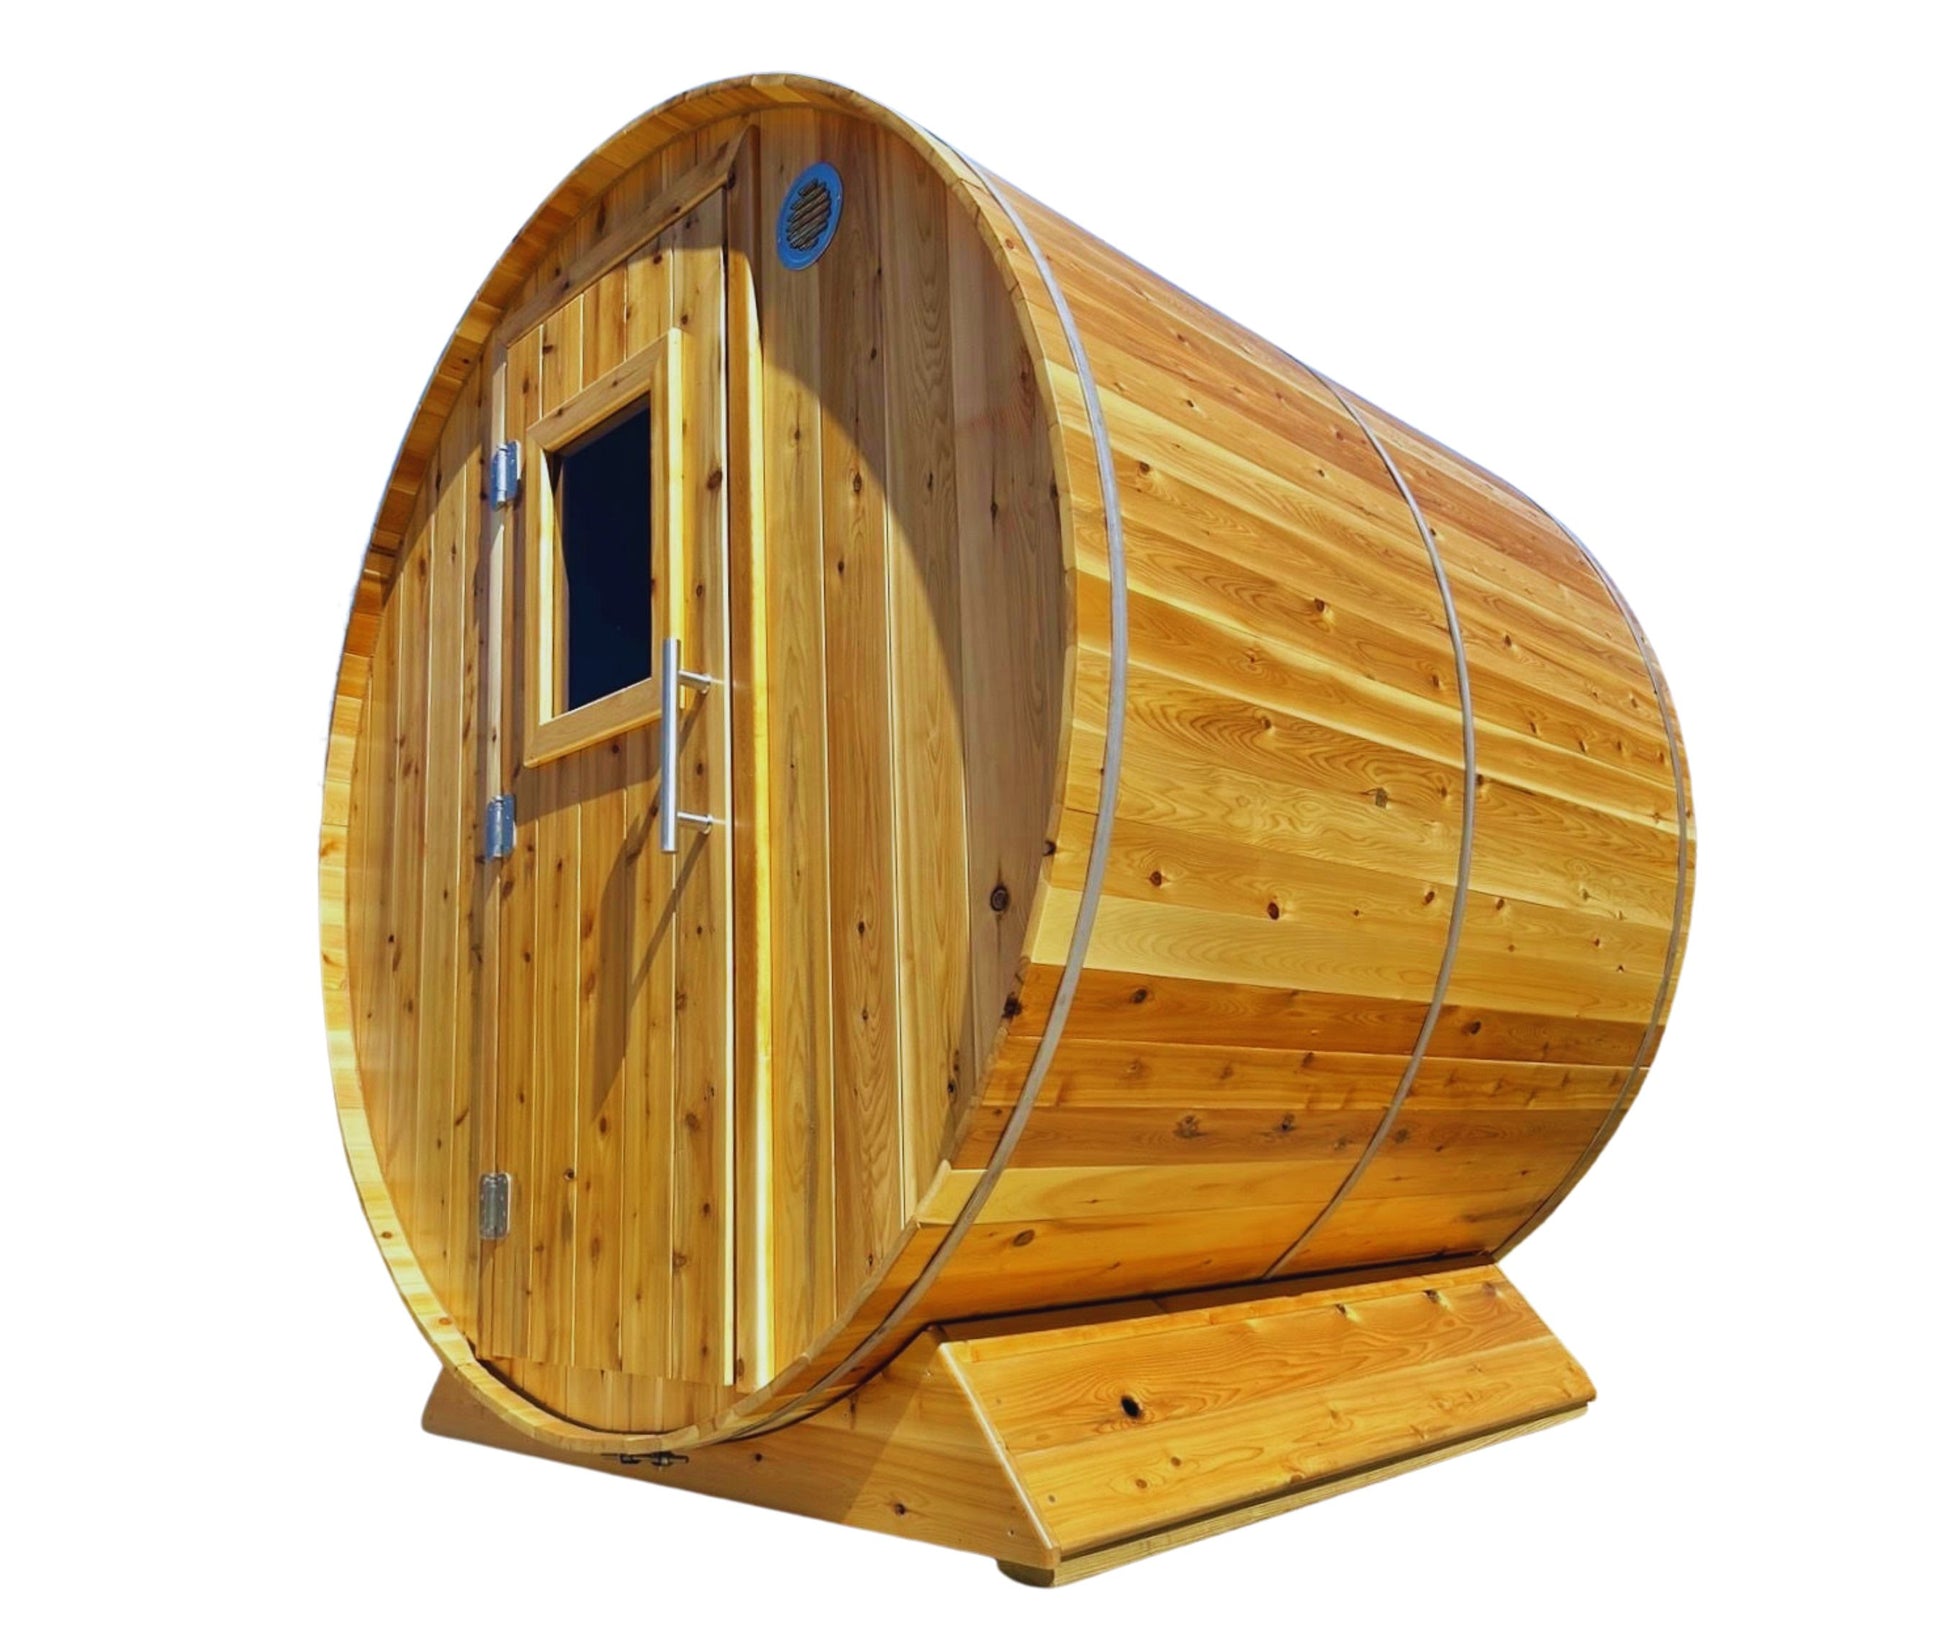 White 5ft Cedar Sauna Alma Michigan, Fully Assembled Delivery, Pre Built Sauna. Available, Lead Time 10-15 days.